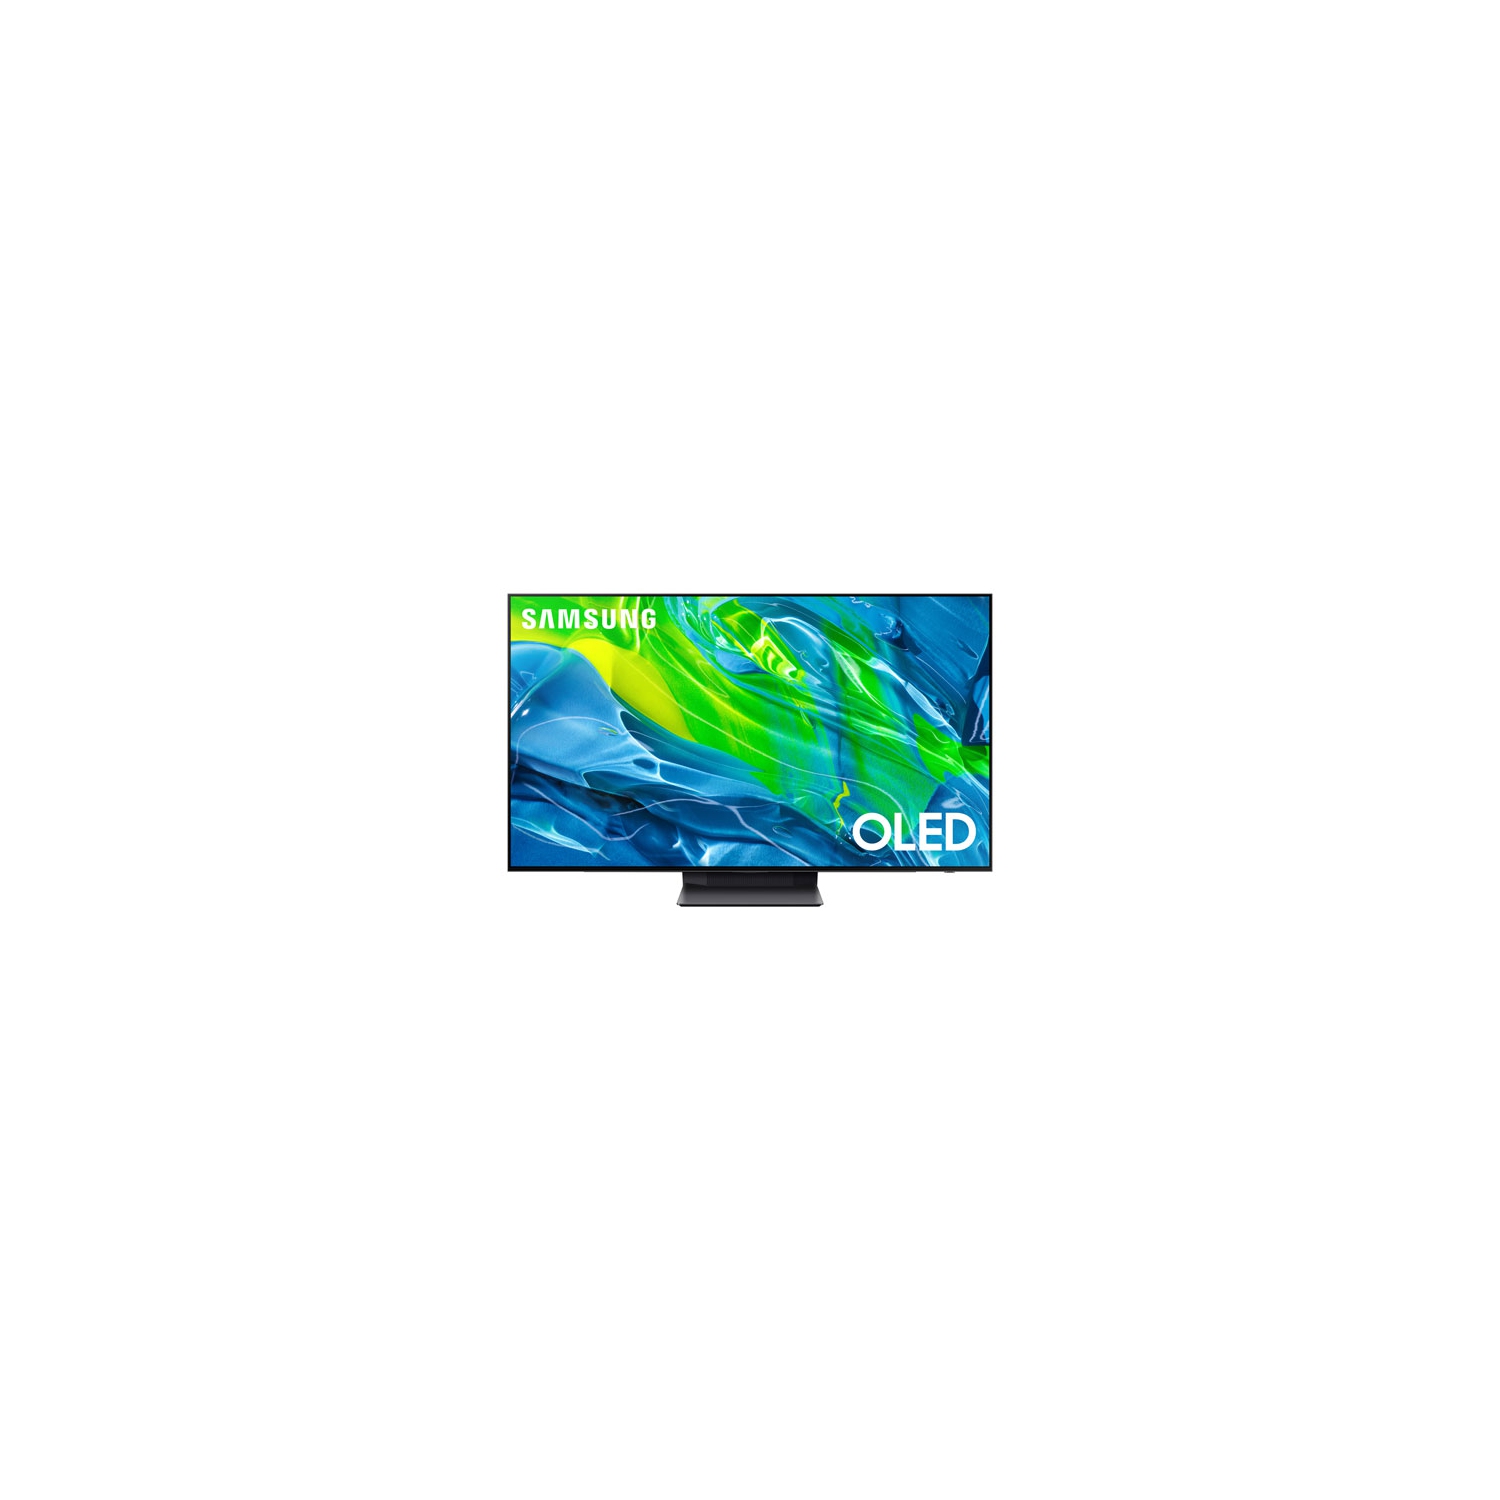 Open Box - Samsung 55" 4K UHD OLED Tizen Smart TV (QN55S95BAFXZC) *LOCAL TORONTO DELIVERY ONLY*